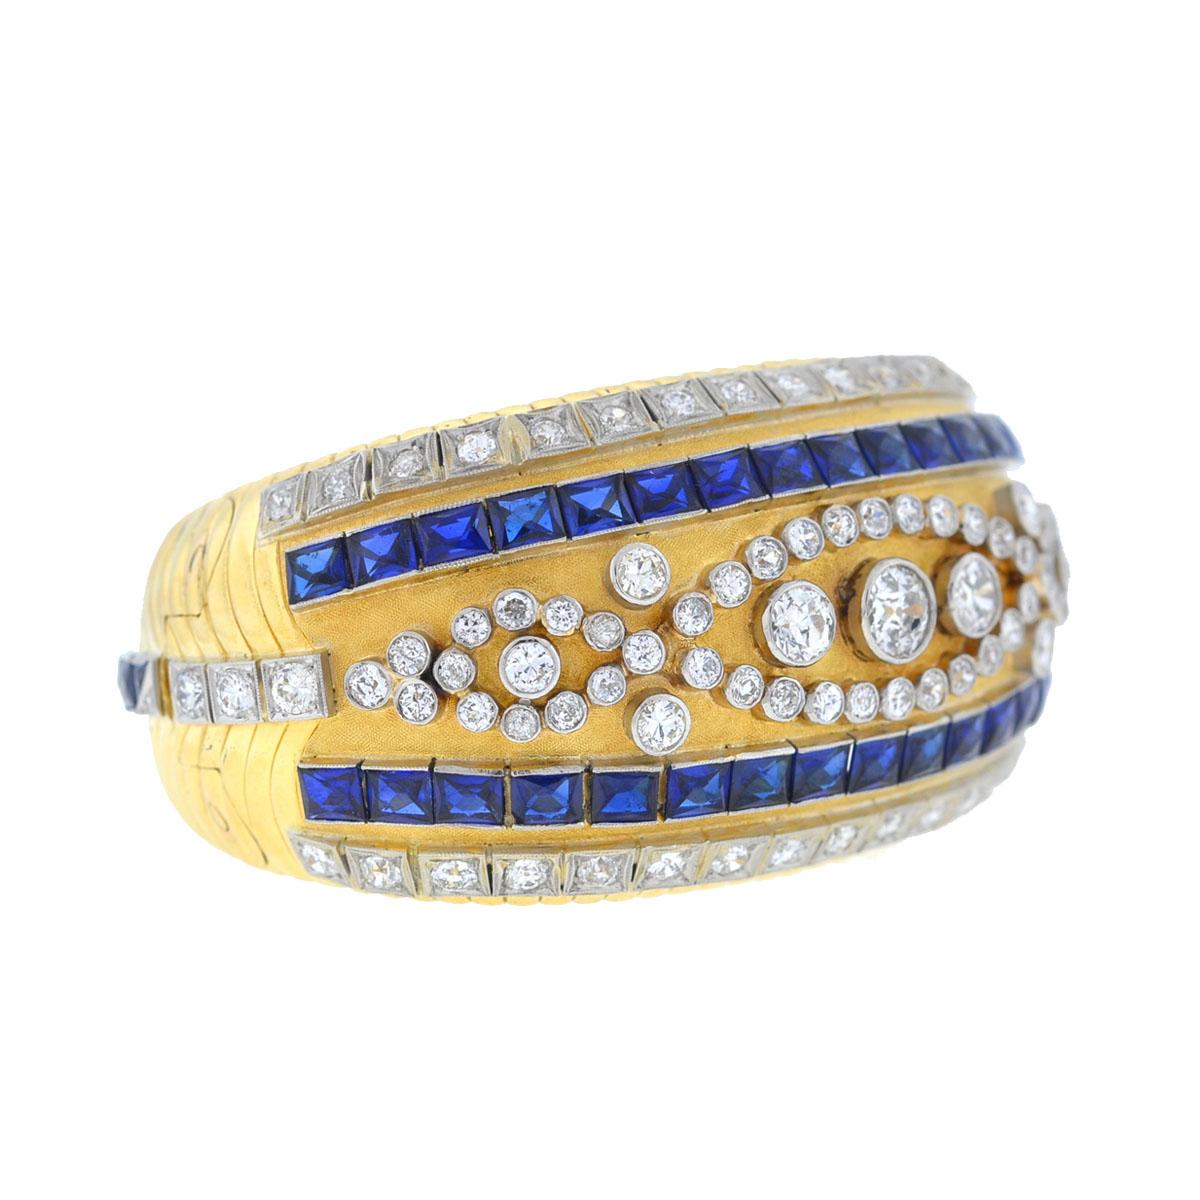 Company-N/A
Style-Vintage Diamond Sapphire Wide Bangle
Metal-18k Yellow Gold 
Stones-Diamond Approx. 6Cts TW
Sapphire -8Cts TW 
Weight -114.86 Grams - Fits a 6